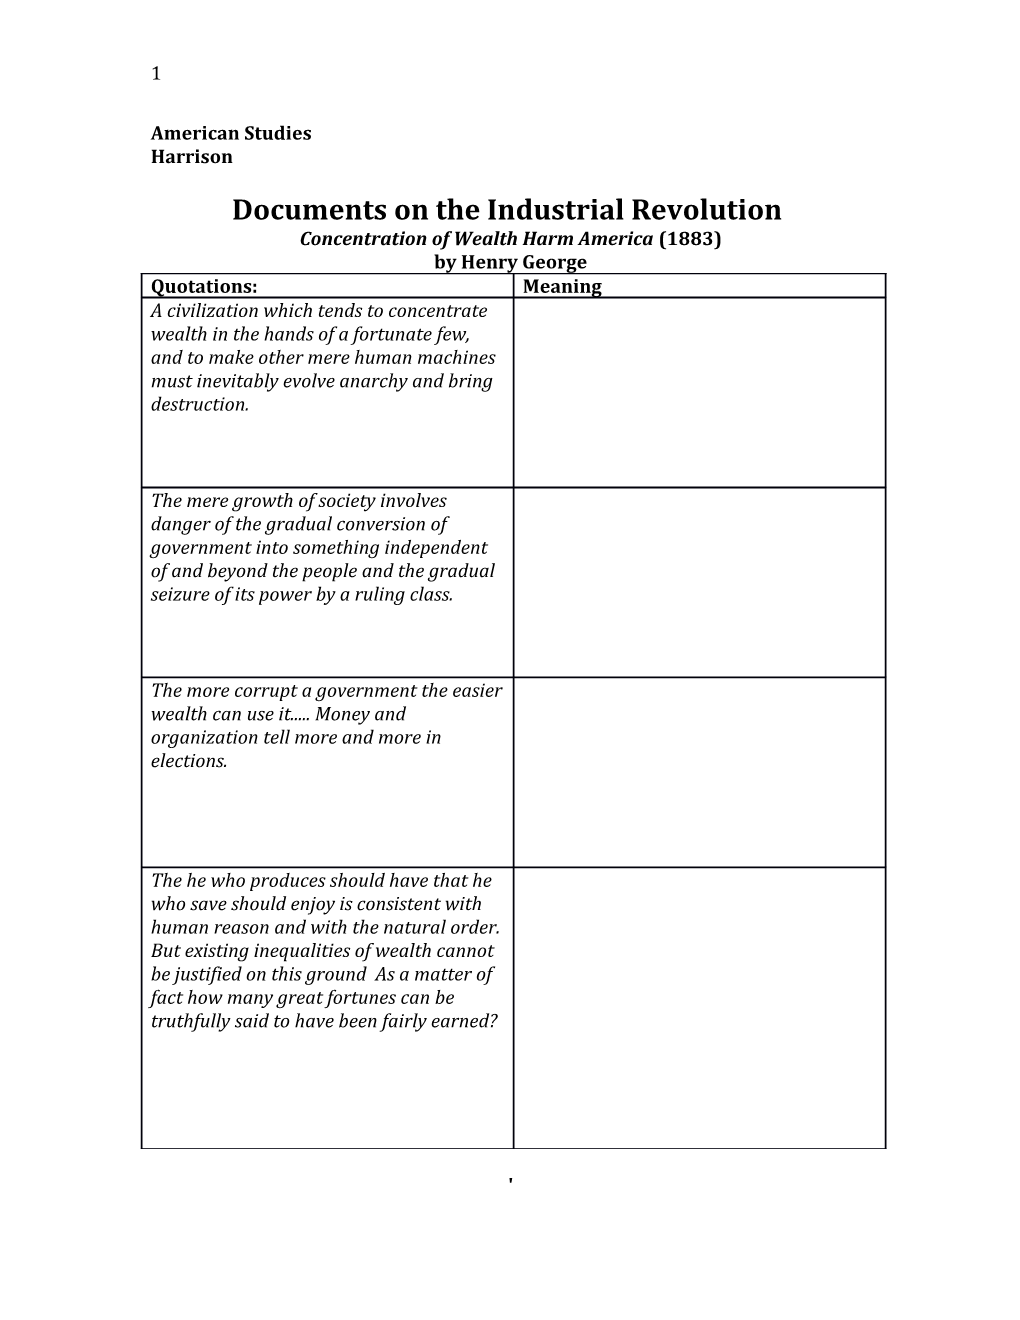 Documents on the Industrial Revolution